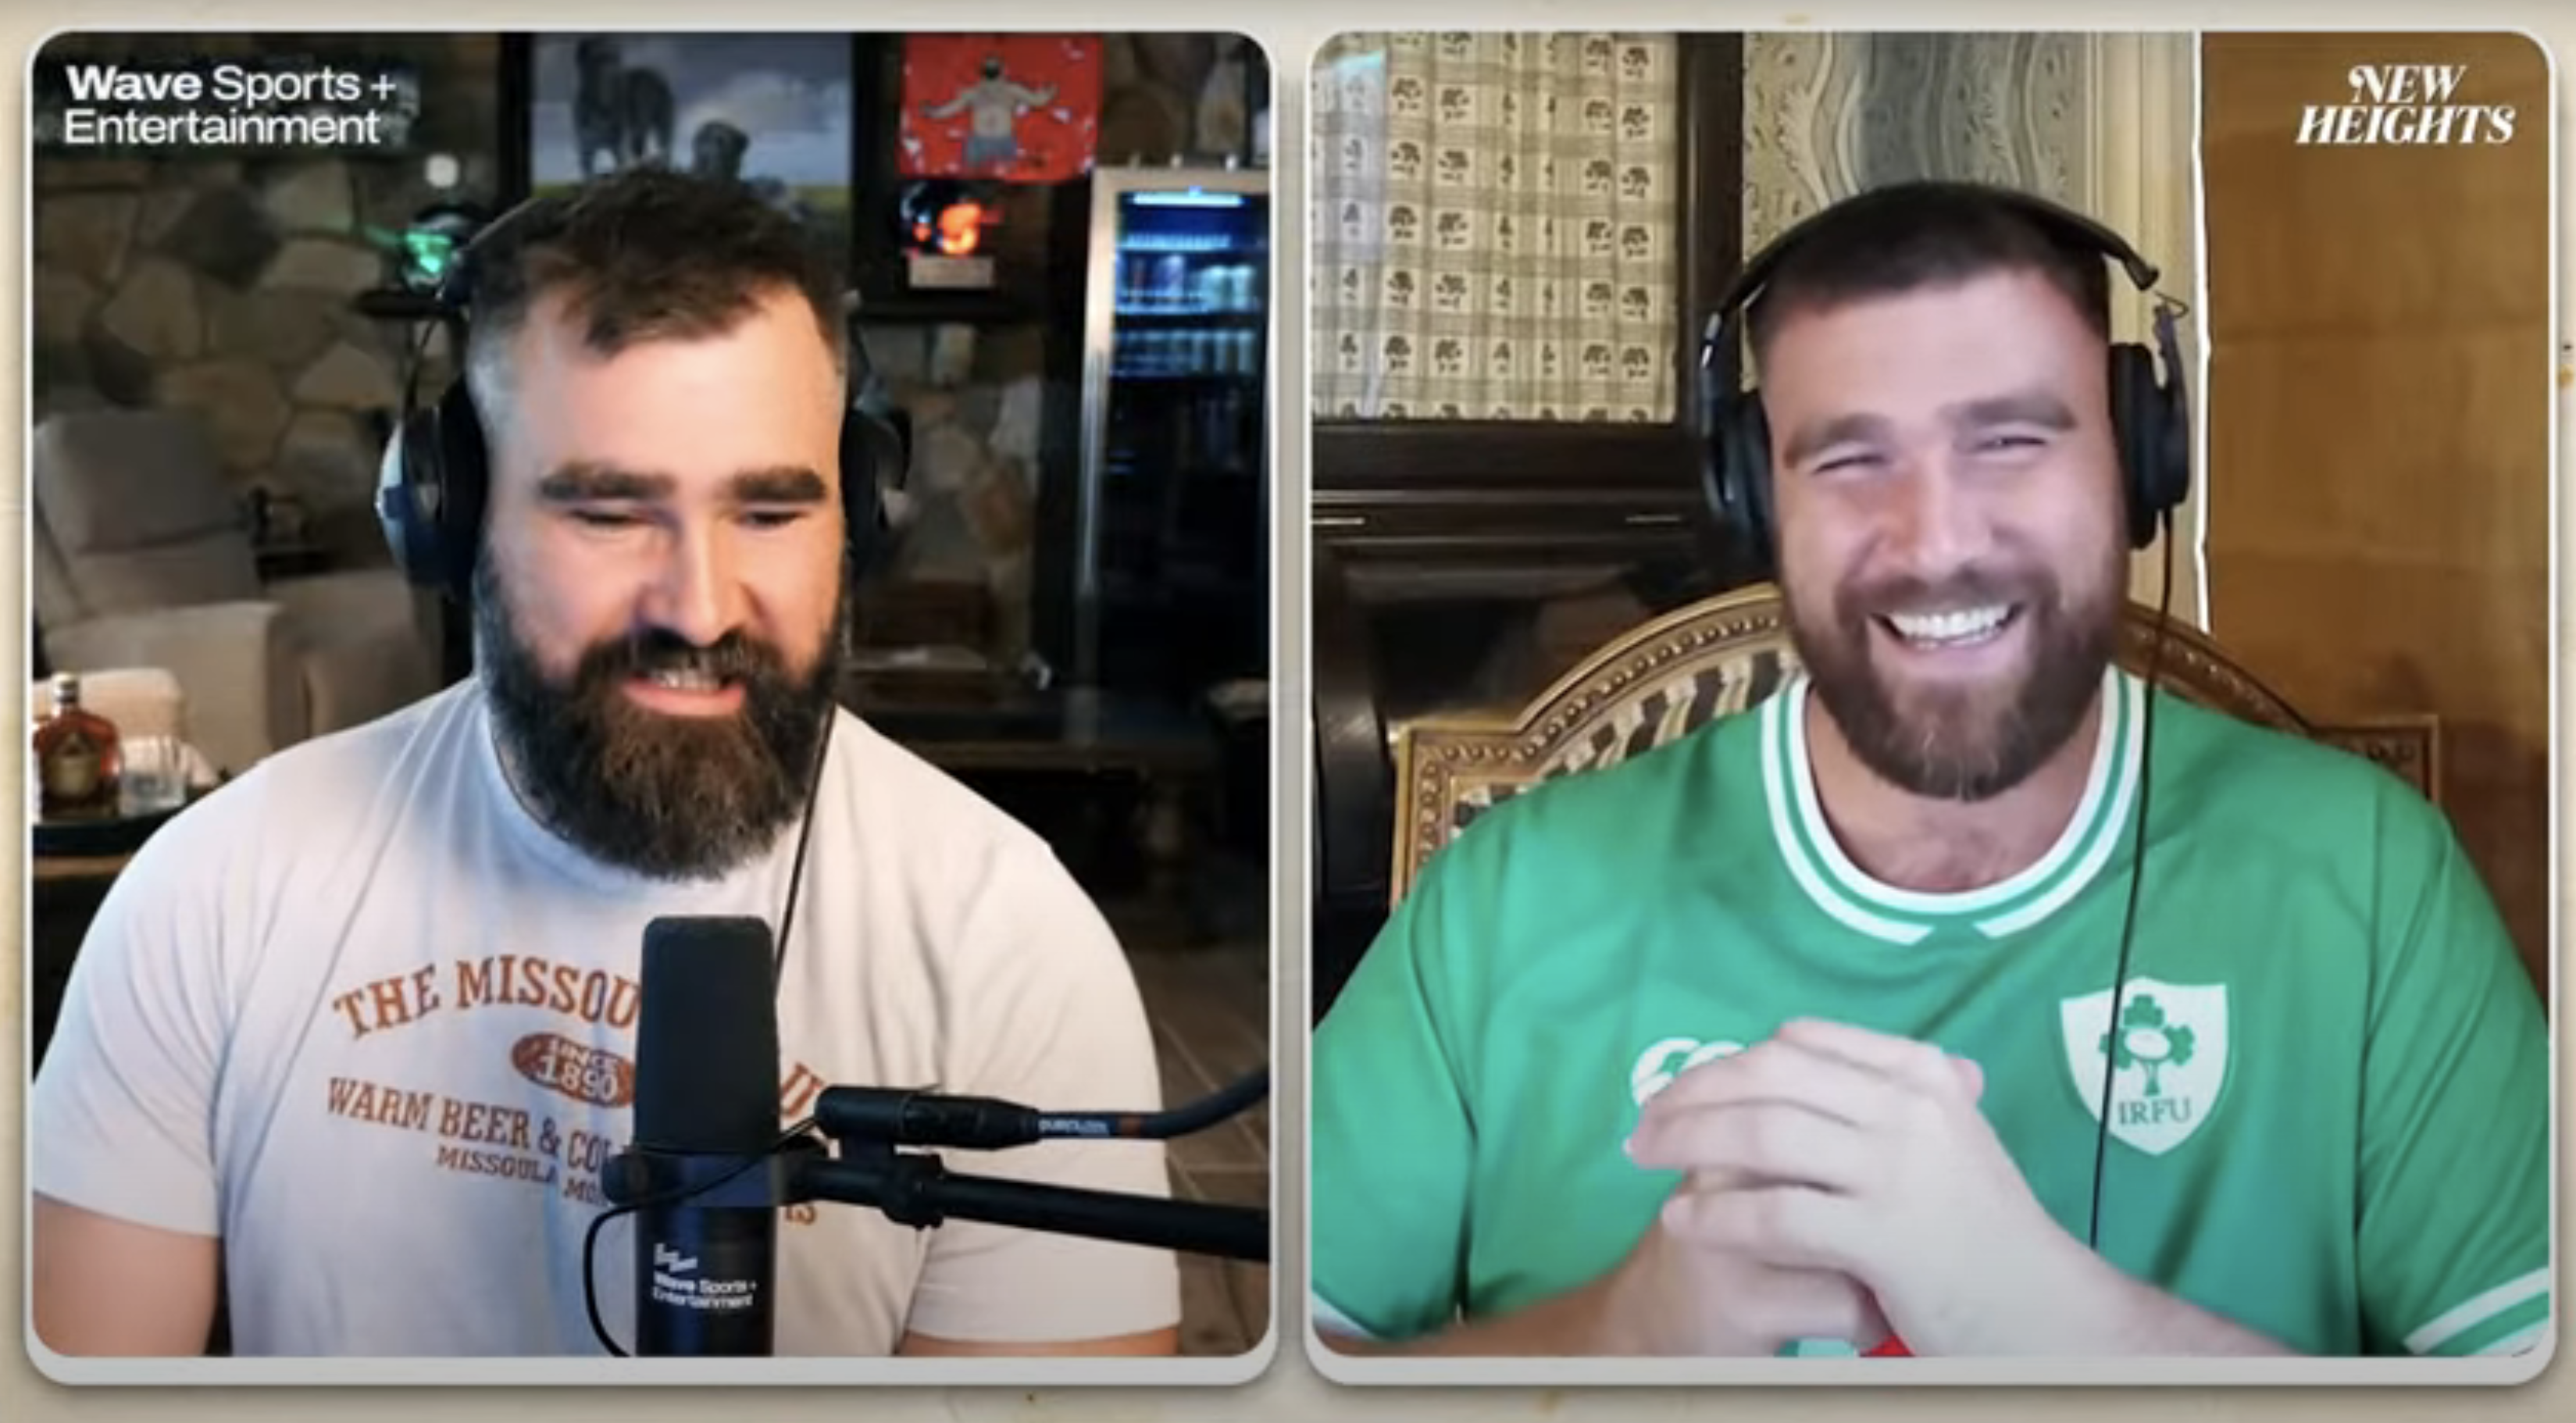 Jason Kelce in a casual t-shirt and Travis Kelce in a sports jersey having a conversation on a video call